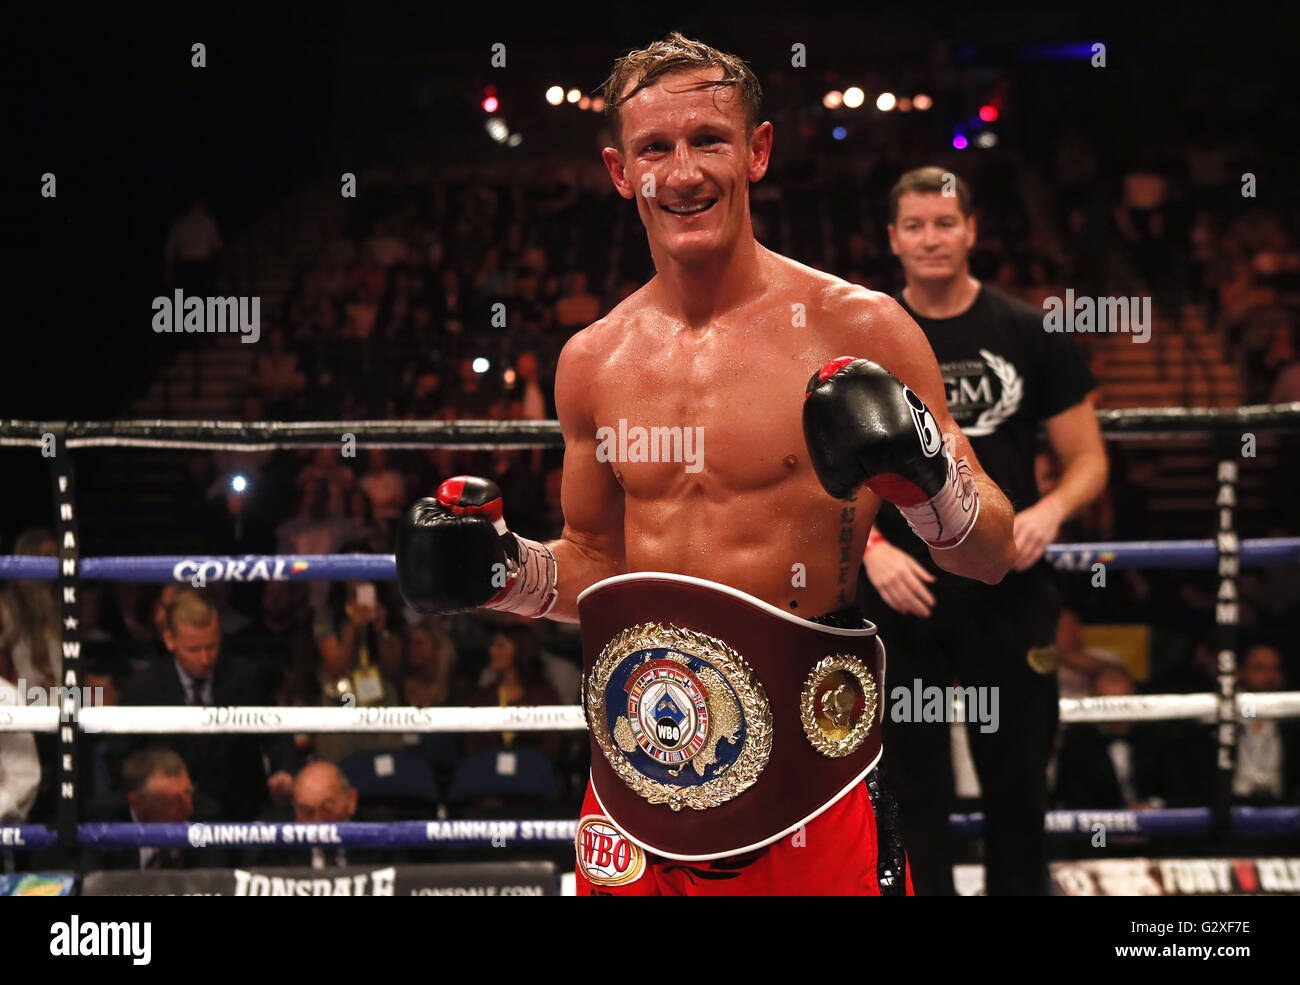 Thomas Stalker celebrates victory over Antonio Joao Bento at the Echo Arena, Liverpool. PRESS ASSOCIATION Photo. Picture date: Saturday June 4, 2016. See PA story BOXING Liverpool. Photo credit should read: Peter Byrne/PA Wire Stock Photo